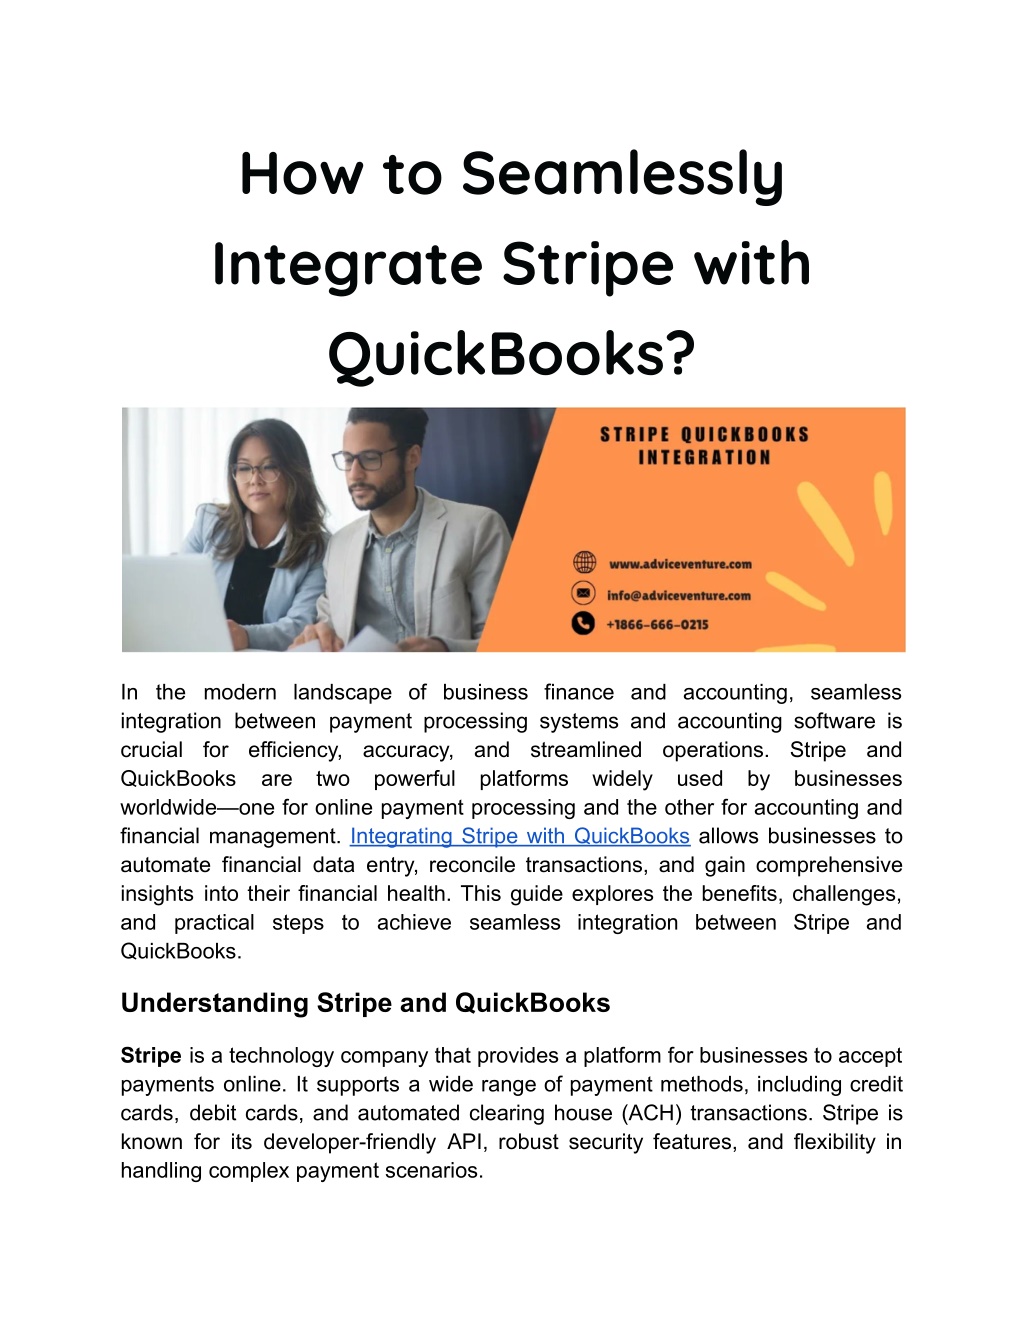 how to seamlessly integrate stripe with quickbooks l.w